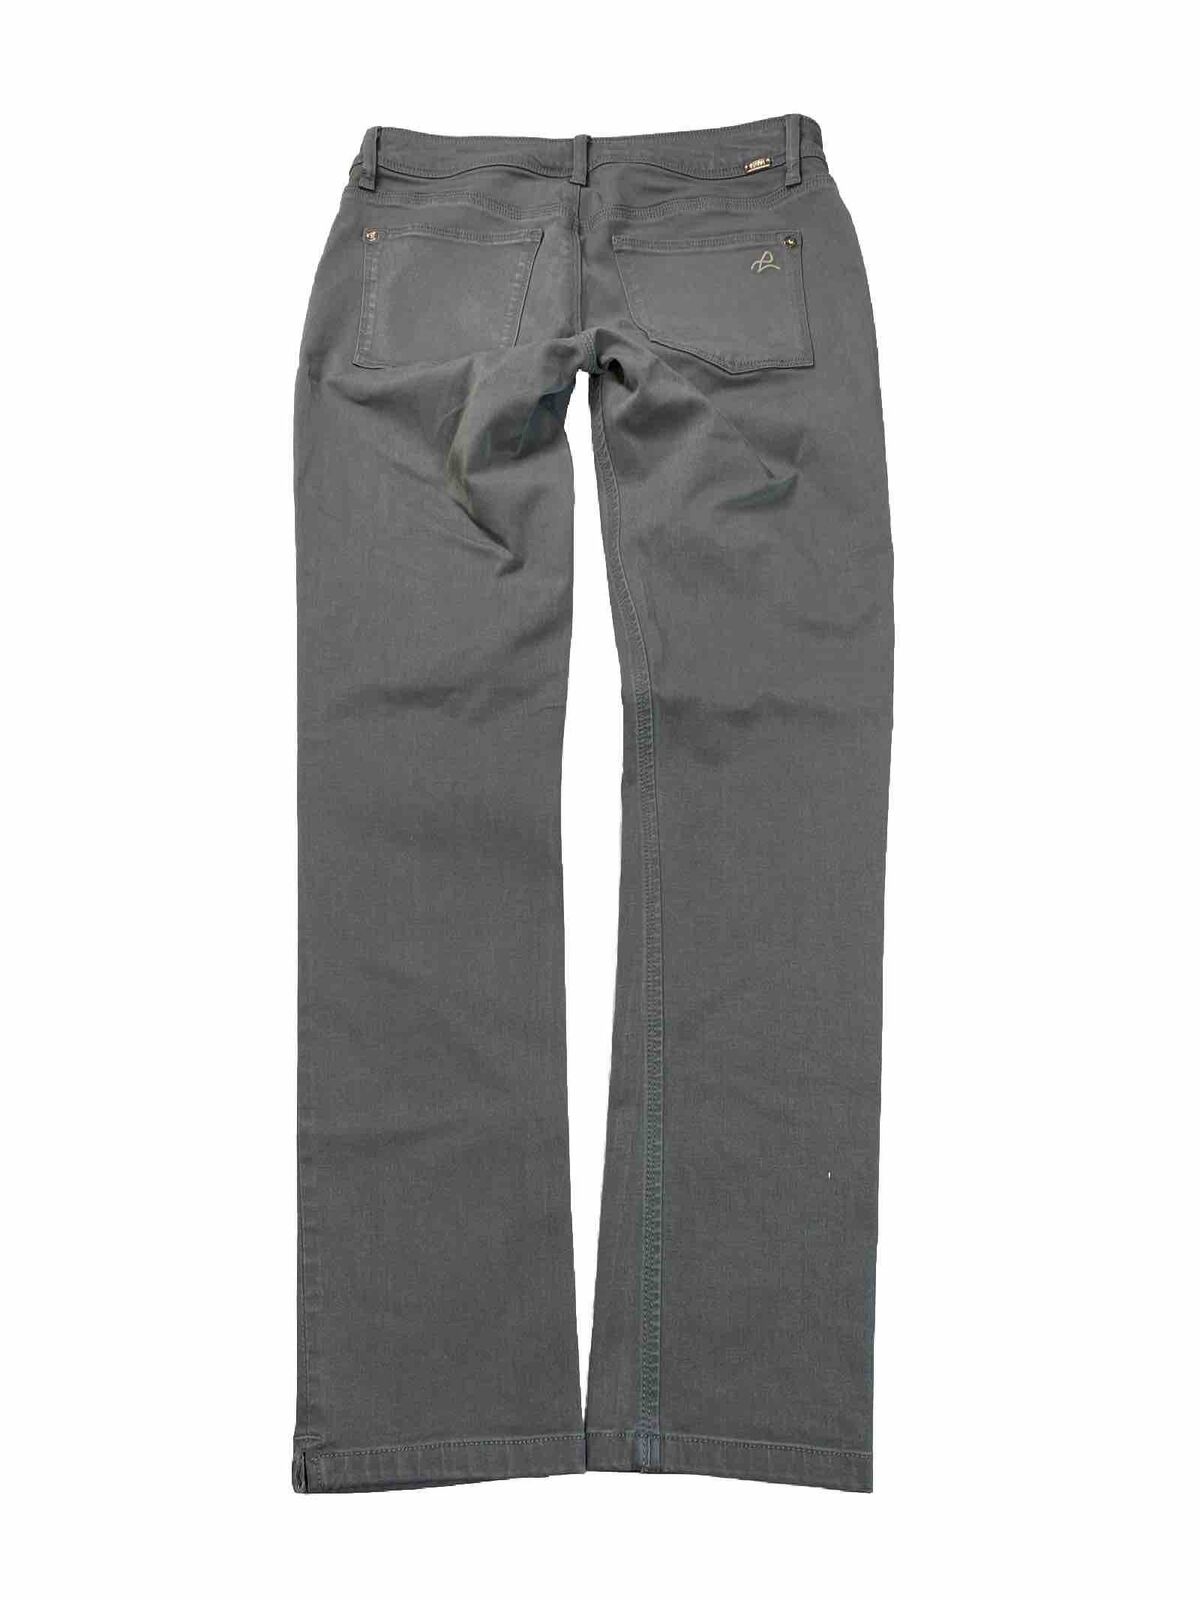 DL1961 Women's Gray Angel Mid Rise Skinny Ankle Jeans - 26